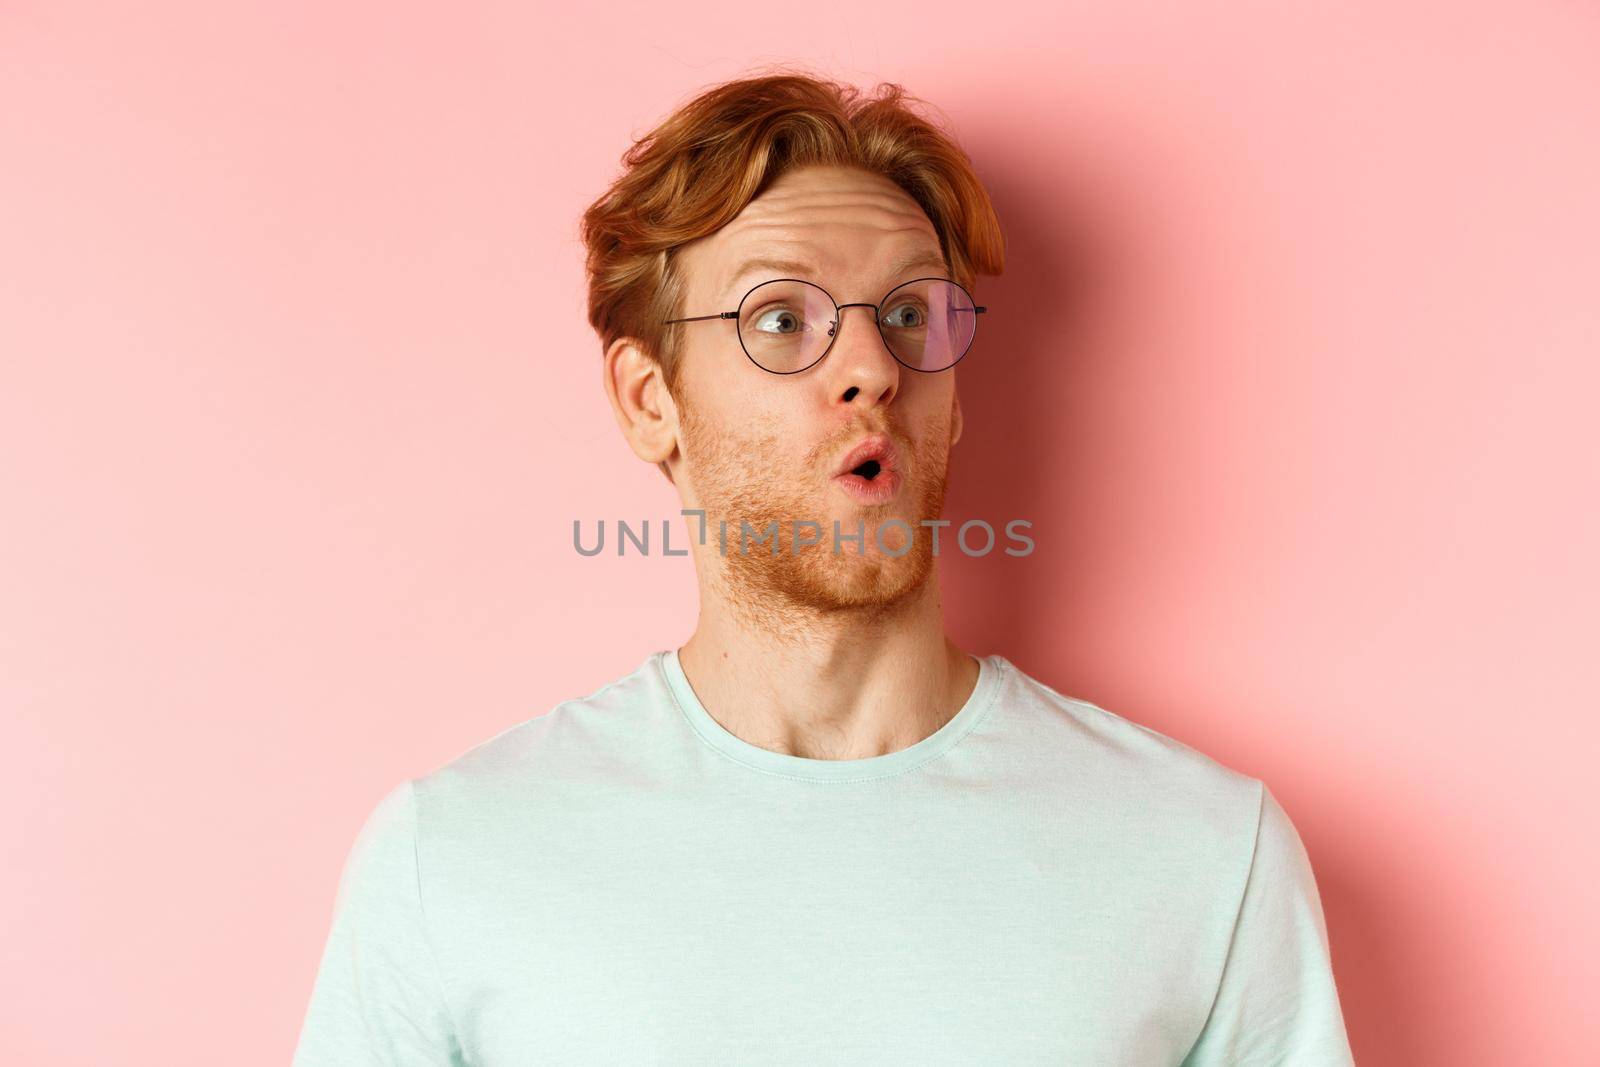 Face of intrigued young man with ginger hair and beard, raising eyebrows surpirsed and looking at upper right corner logo, standing over pink background by Benzoix